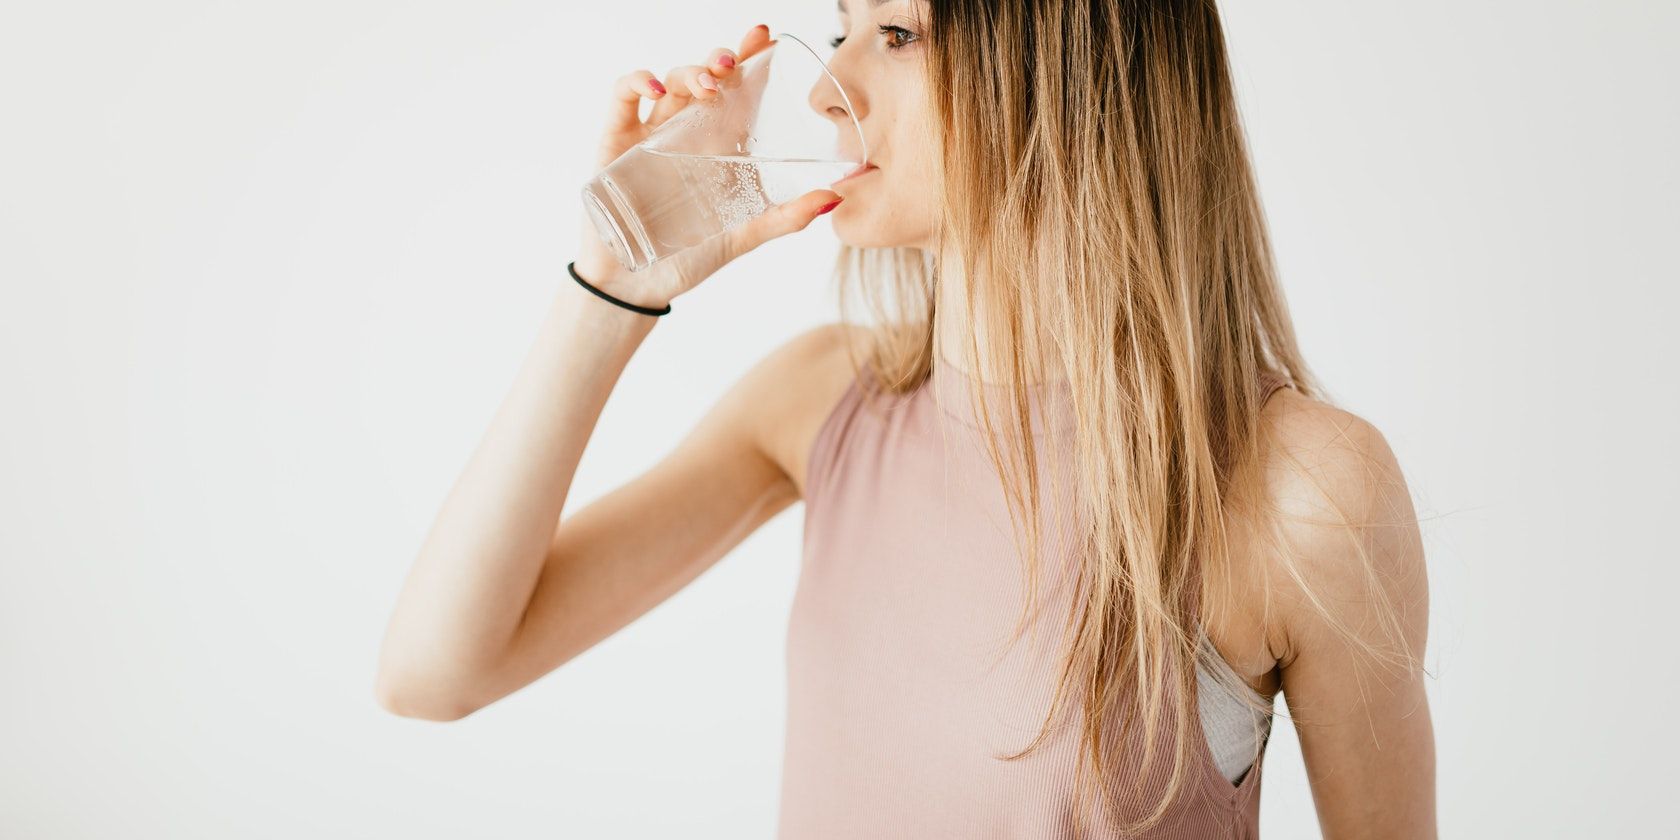 Woman in Pink Drinking Water w/ Right Hand